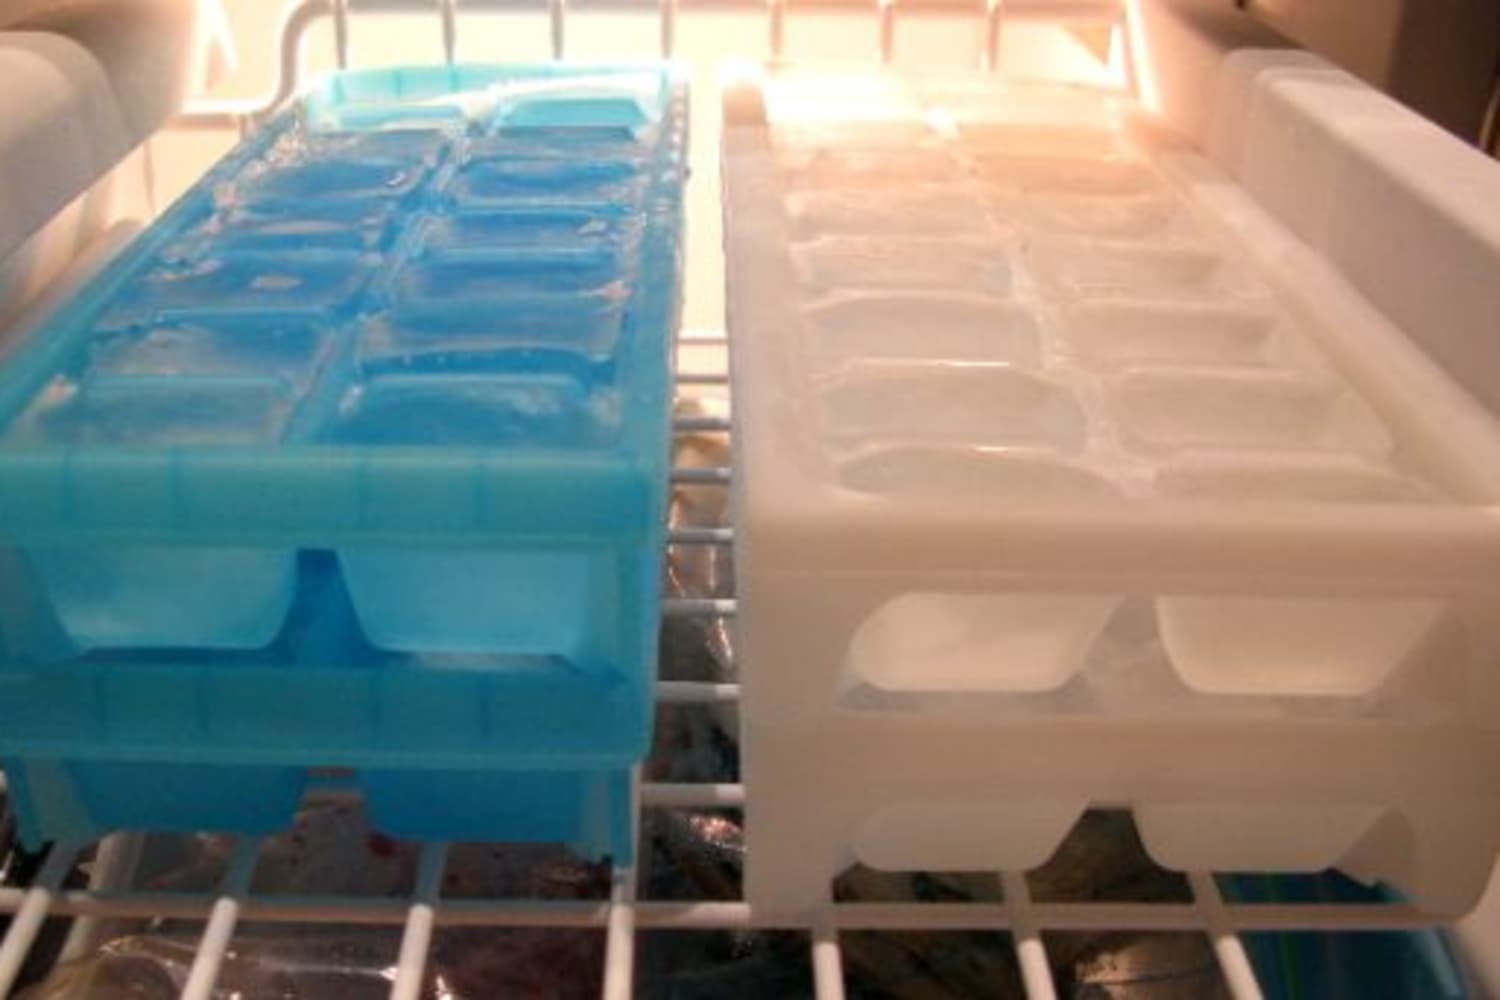 8 Super-Smart Uses for an Ice Cube Tray 